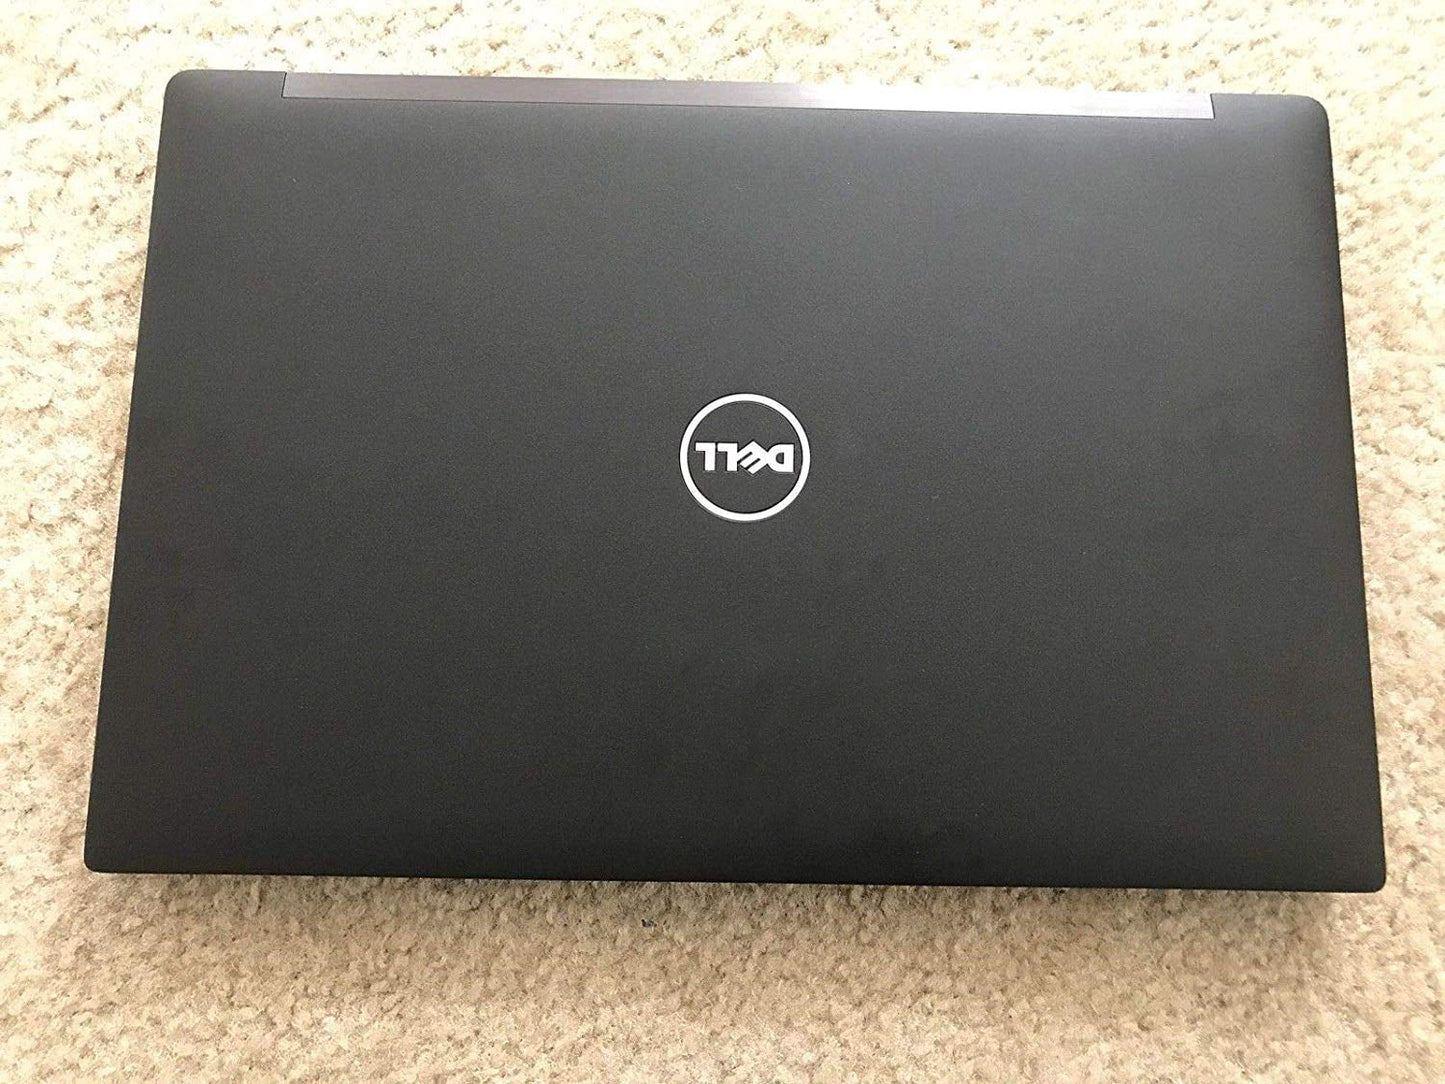 Excellent Dell 14" HD laptop Intel i5 2.6GHz 16GB RAM 256GB SSD WebCam Win 10Pro (Pre-Owned)